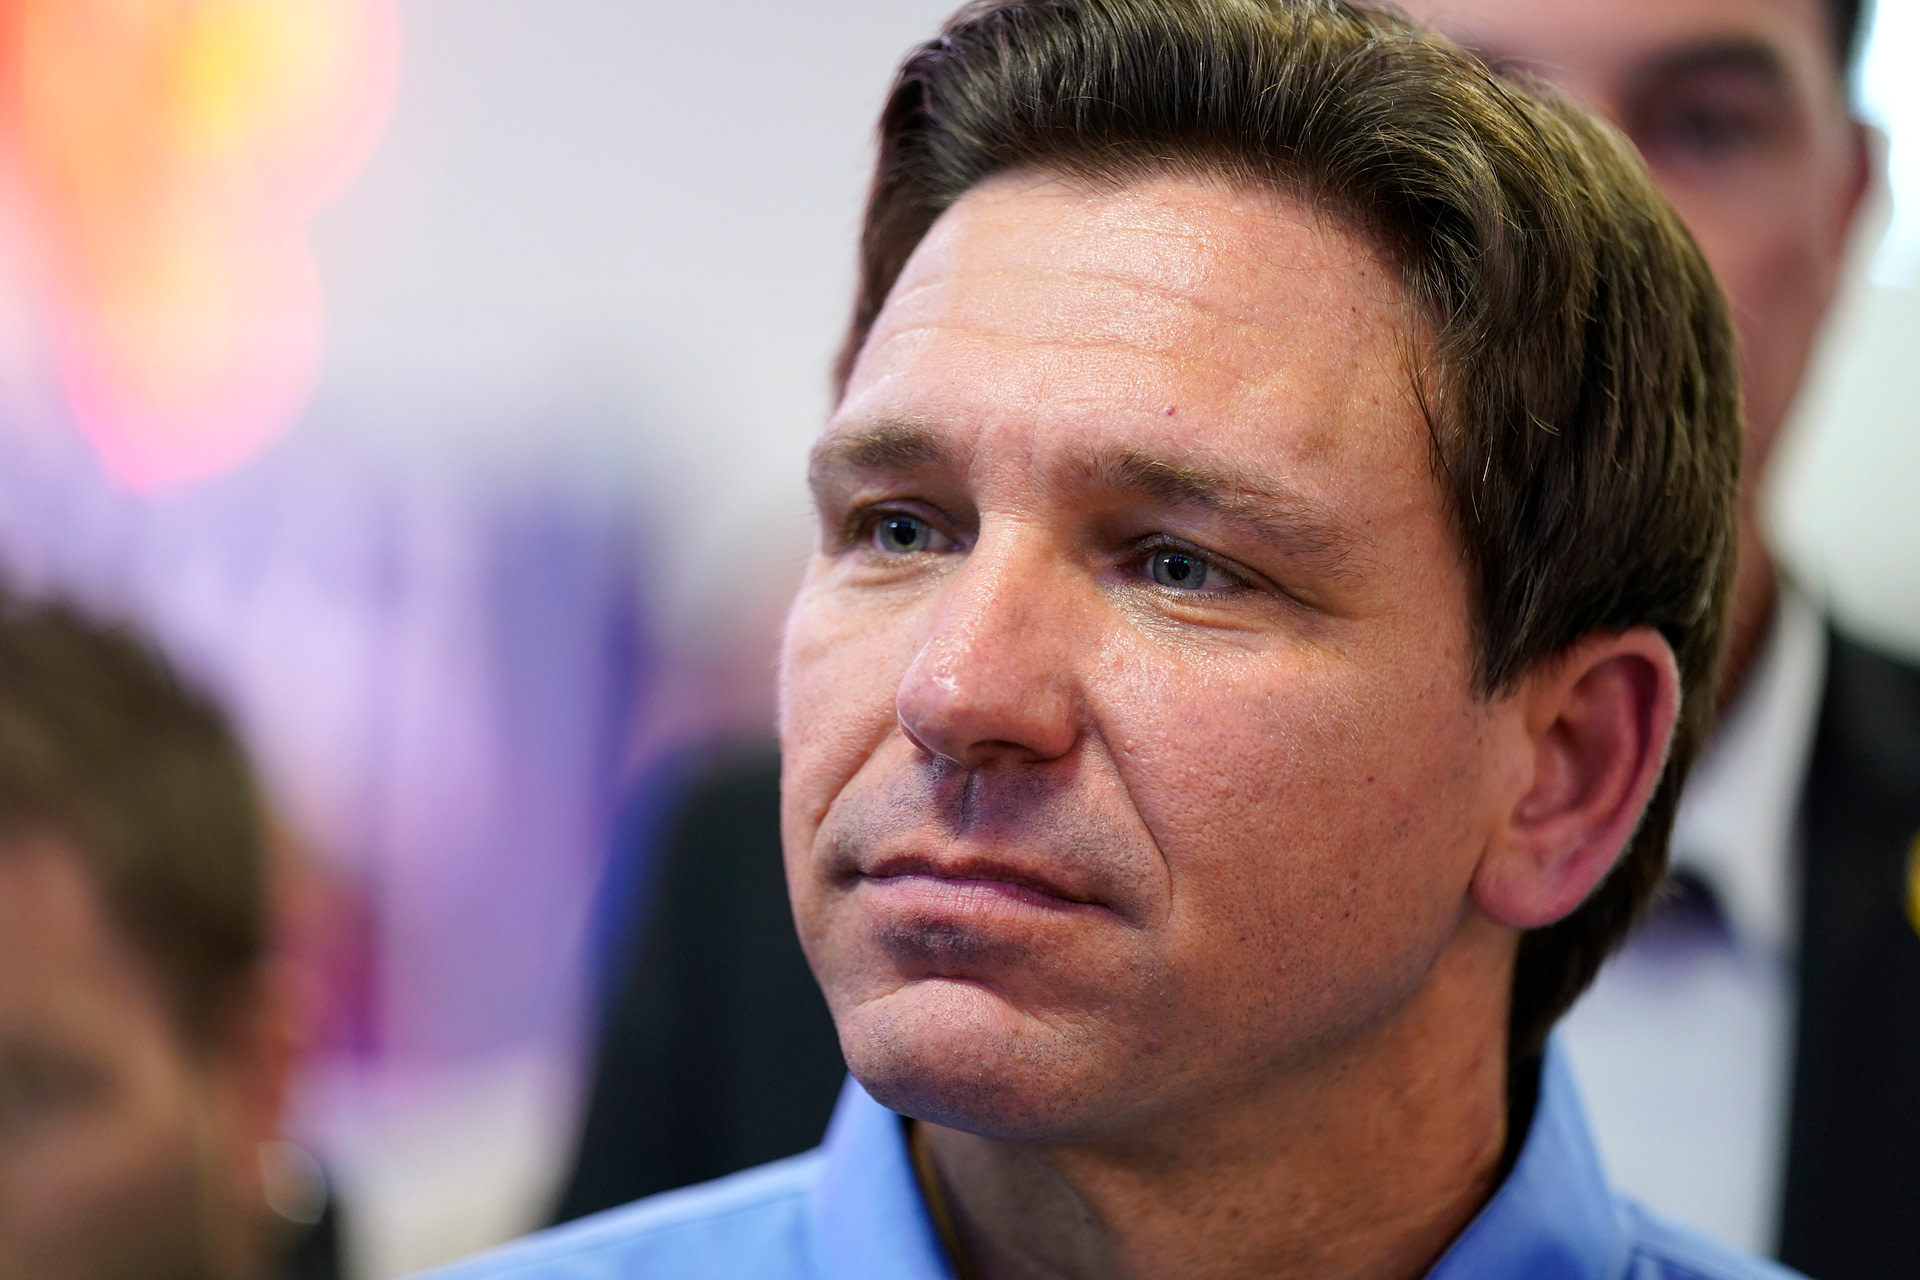 DeSantis to gather top donors as presidential launch looms